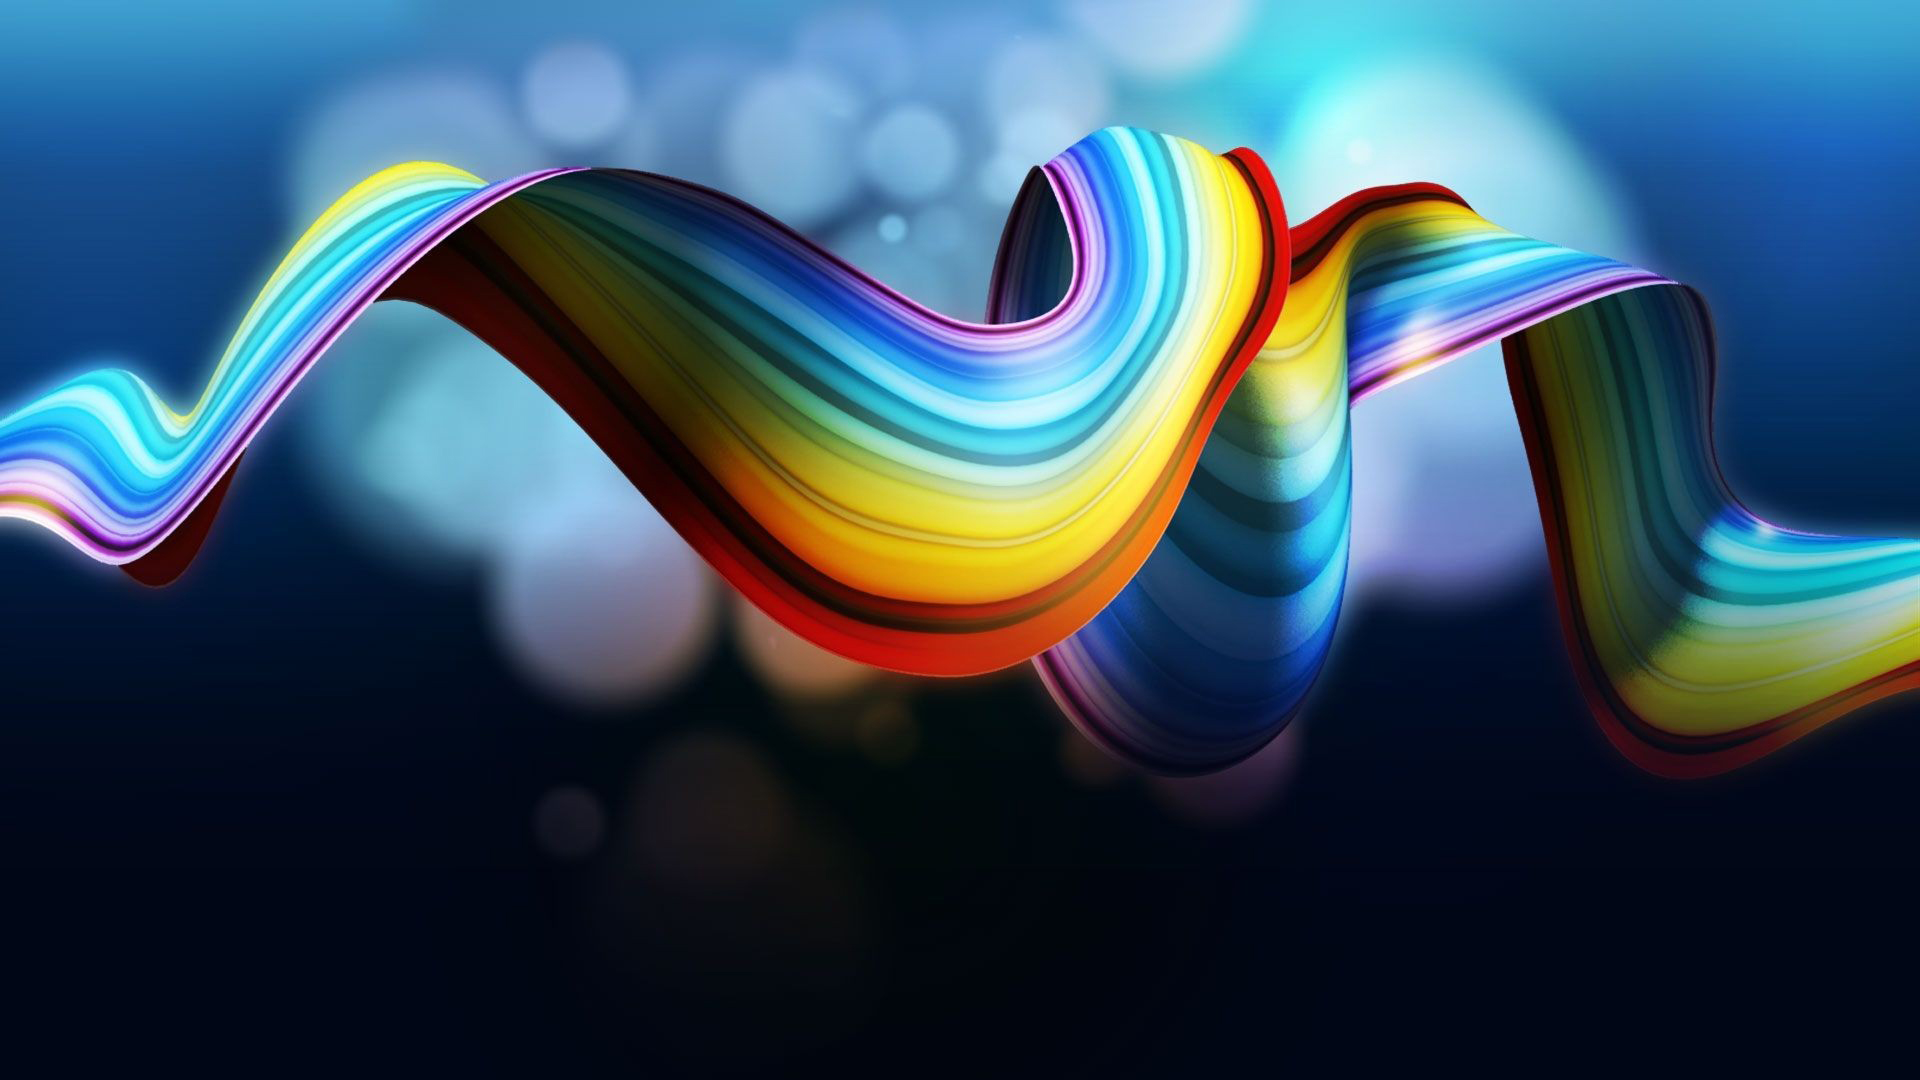 HD Rainbow Wallpaper For Your